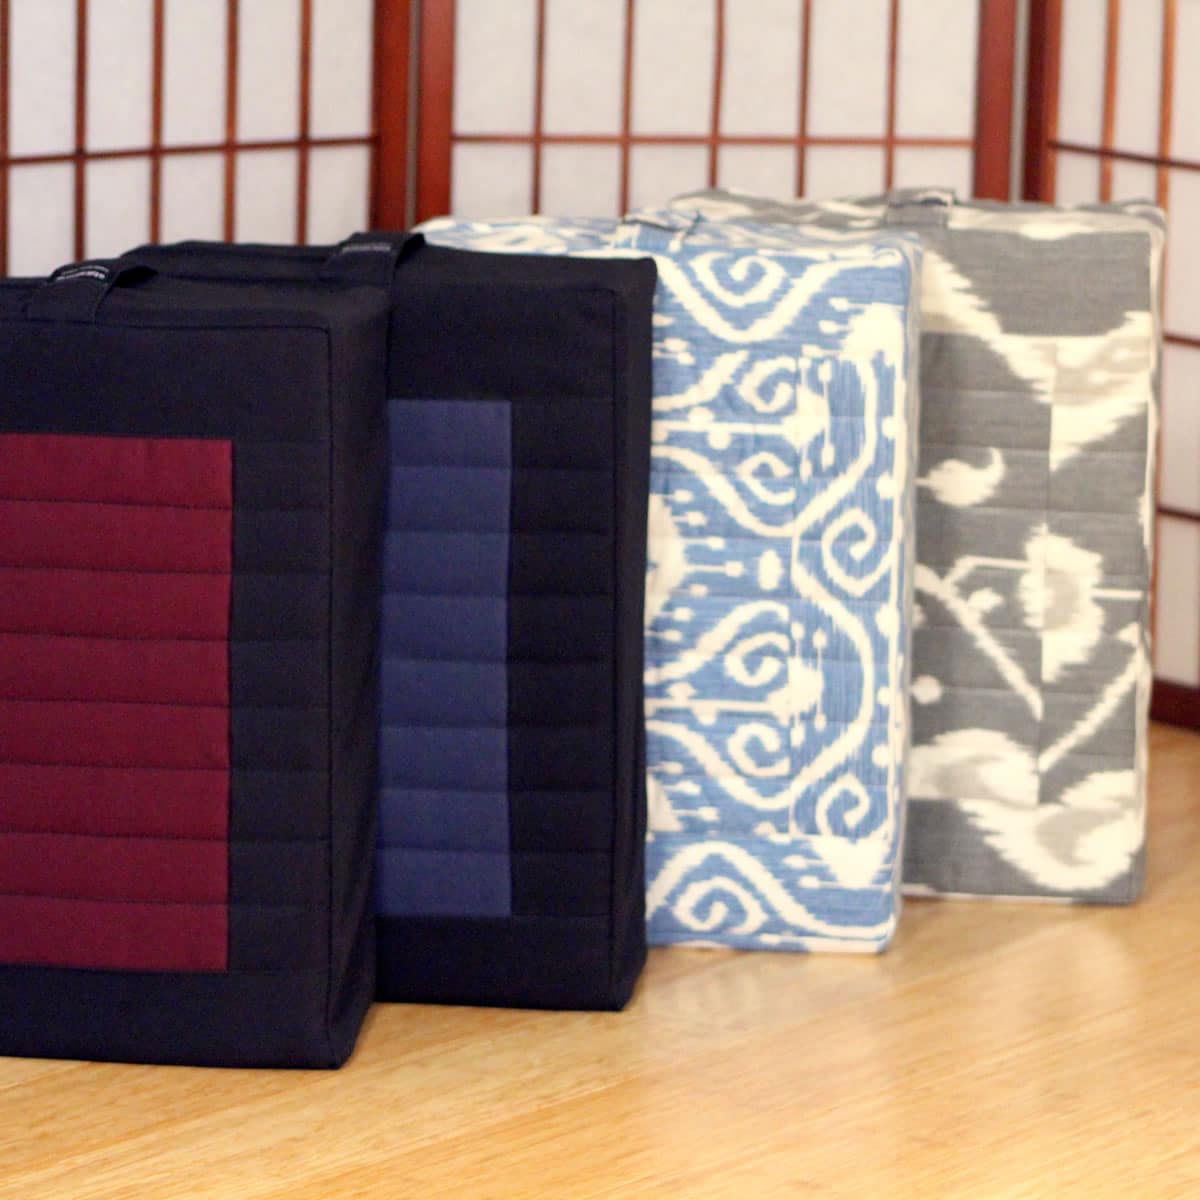 Variety of Tibetan Seat meditation cushions, patterns and solid colors, firm foam meditation cushions in gomden style